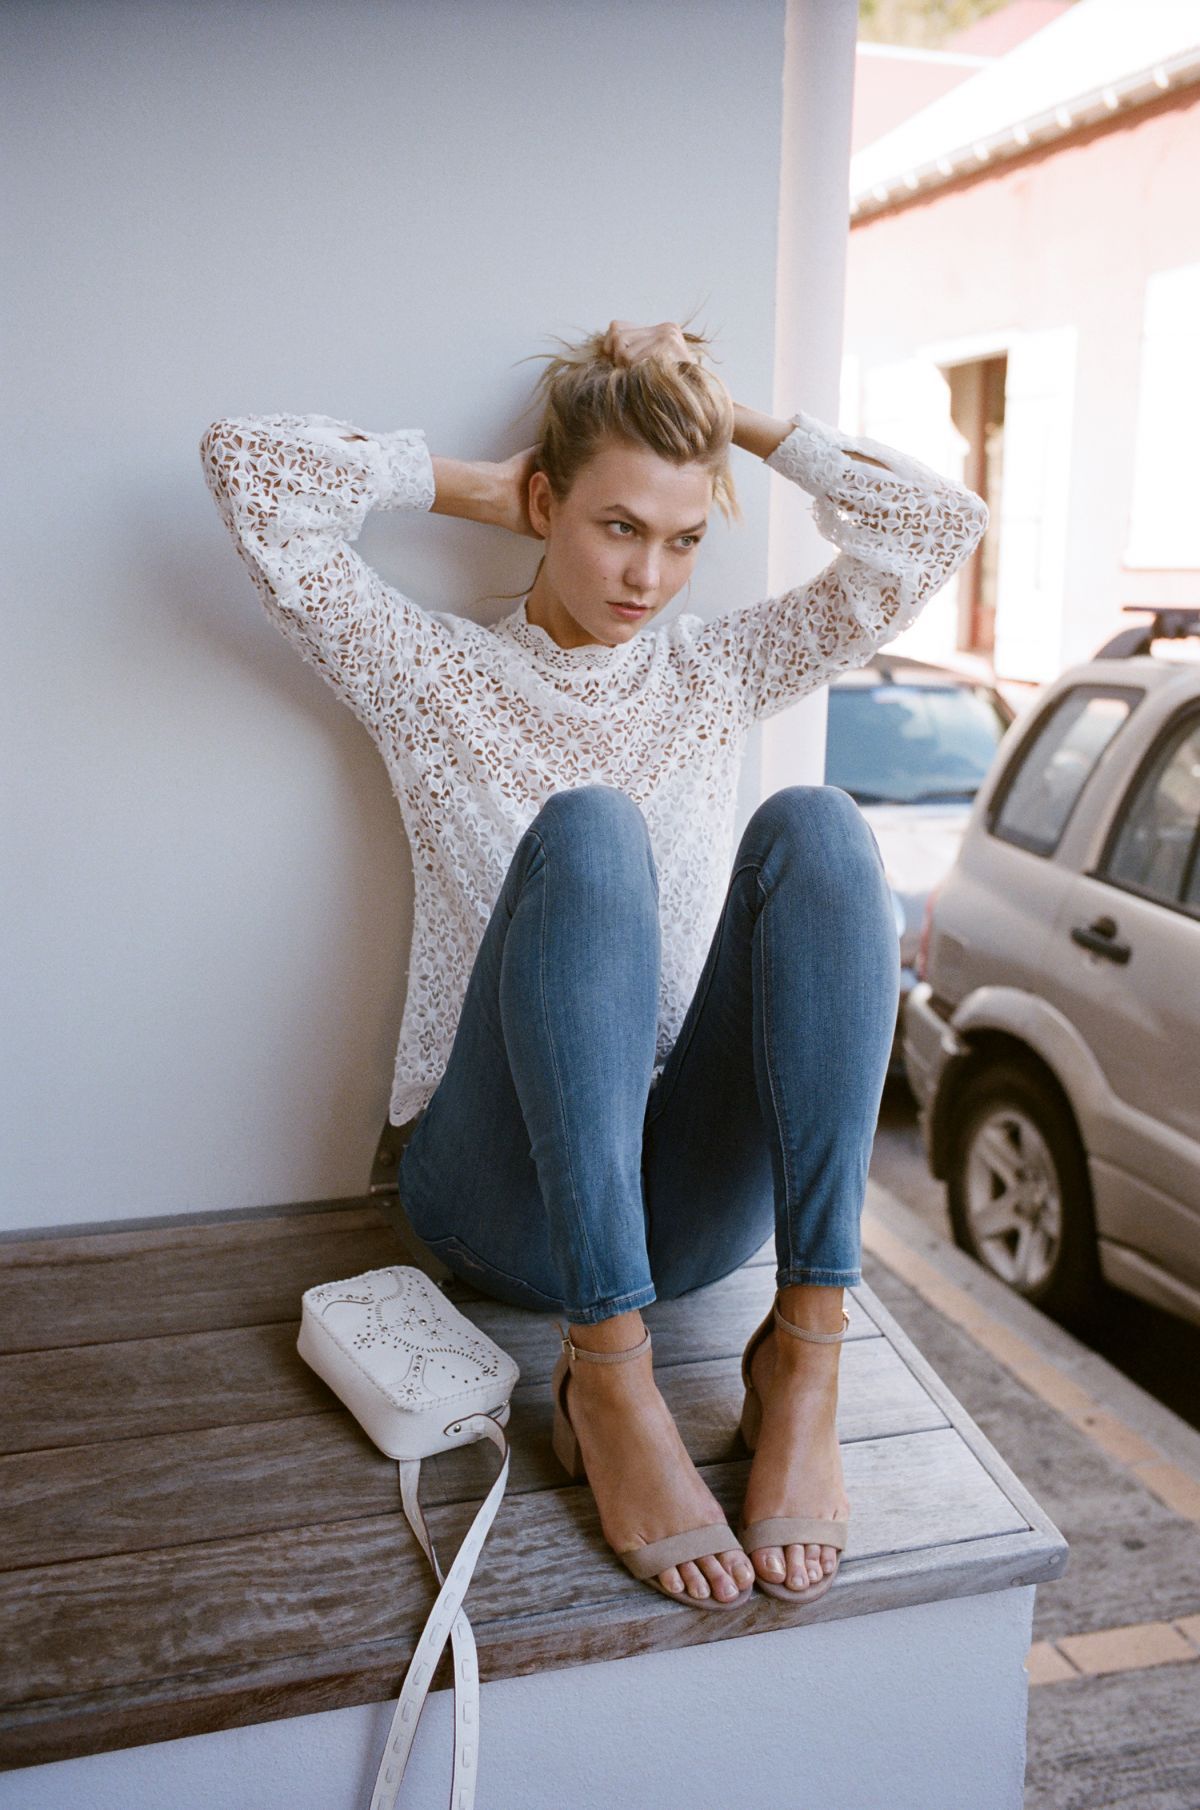 Karlie Kloss For Express Collection Feet Toes Footfetis